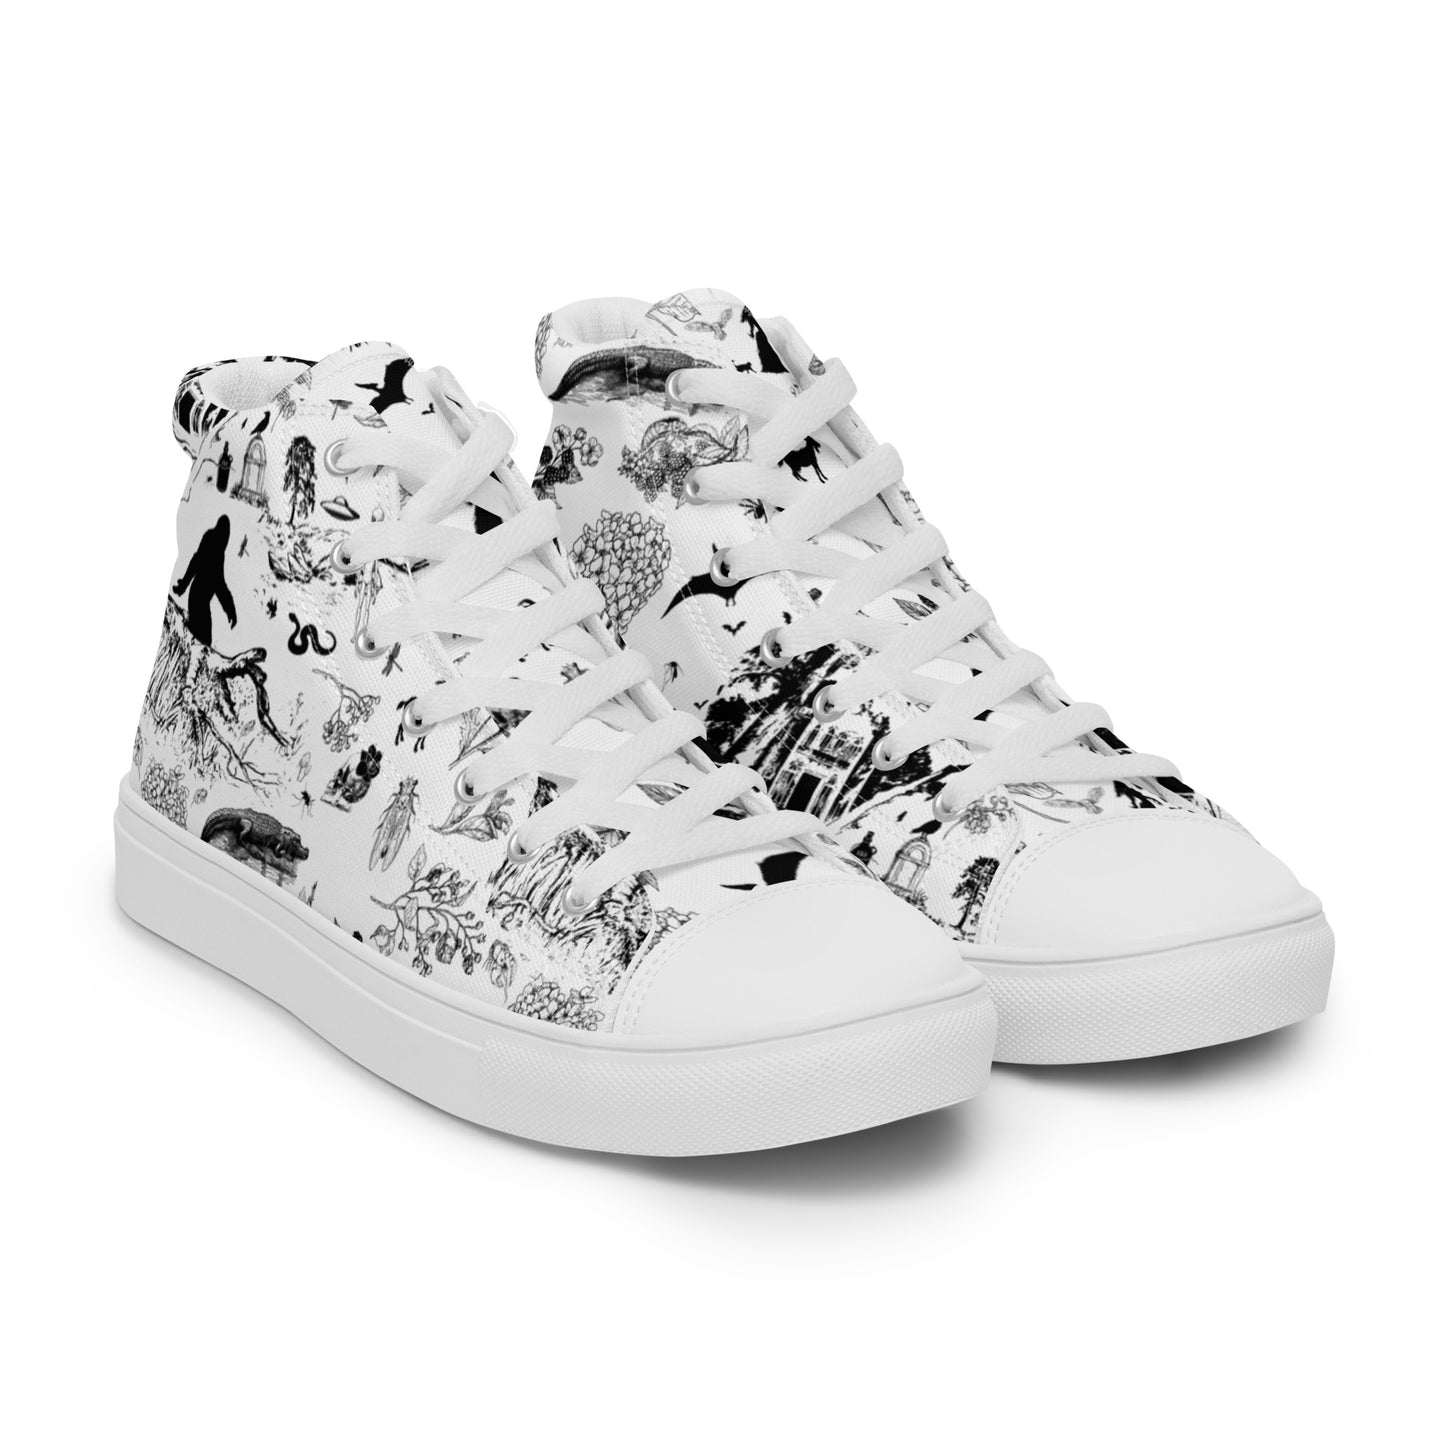 Southern Gothic Toile - Black and White Women’s high top shoes